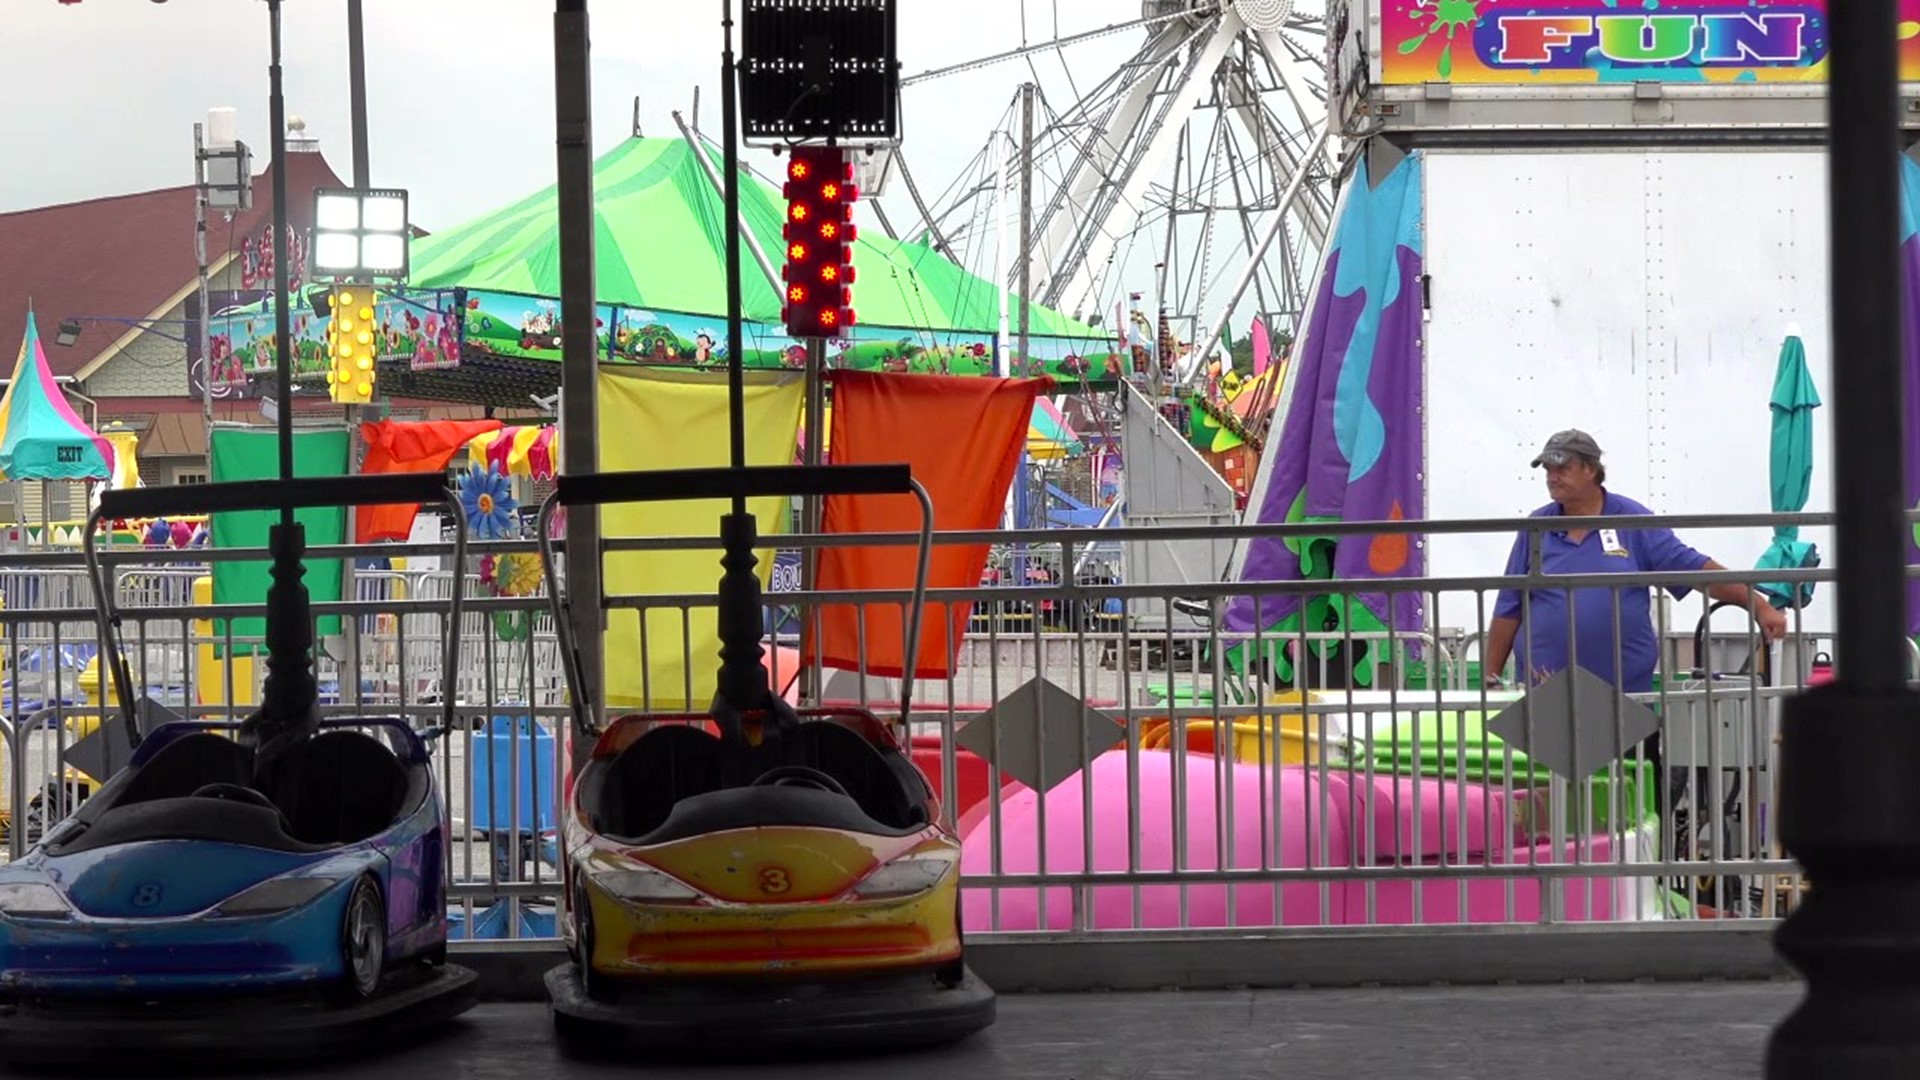 York State Fair returns for another year | fox43.com